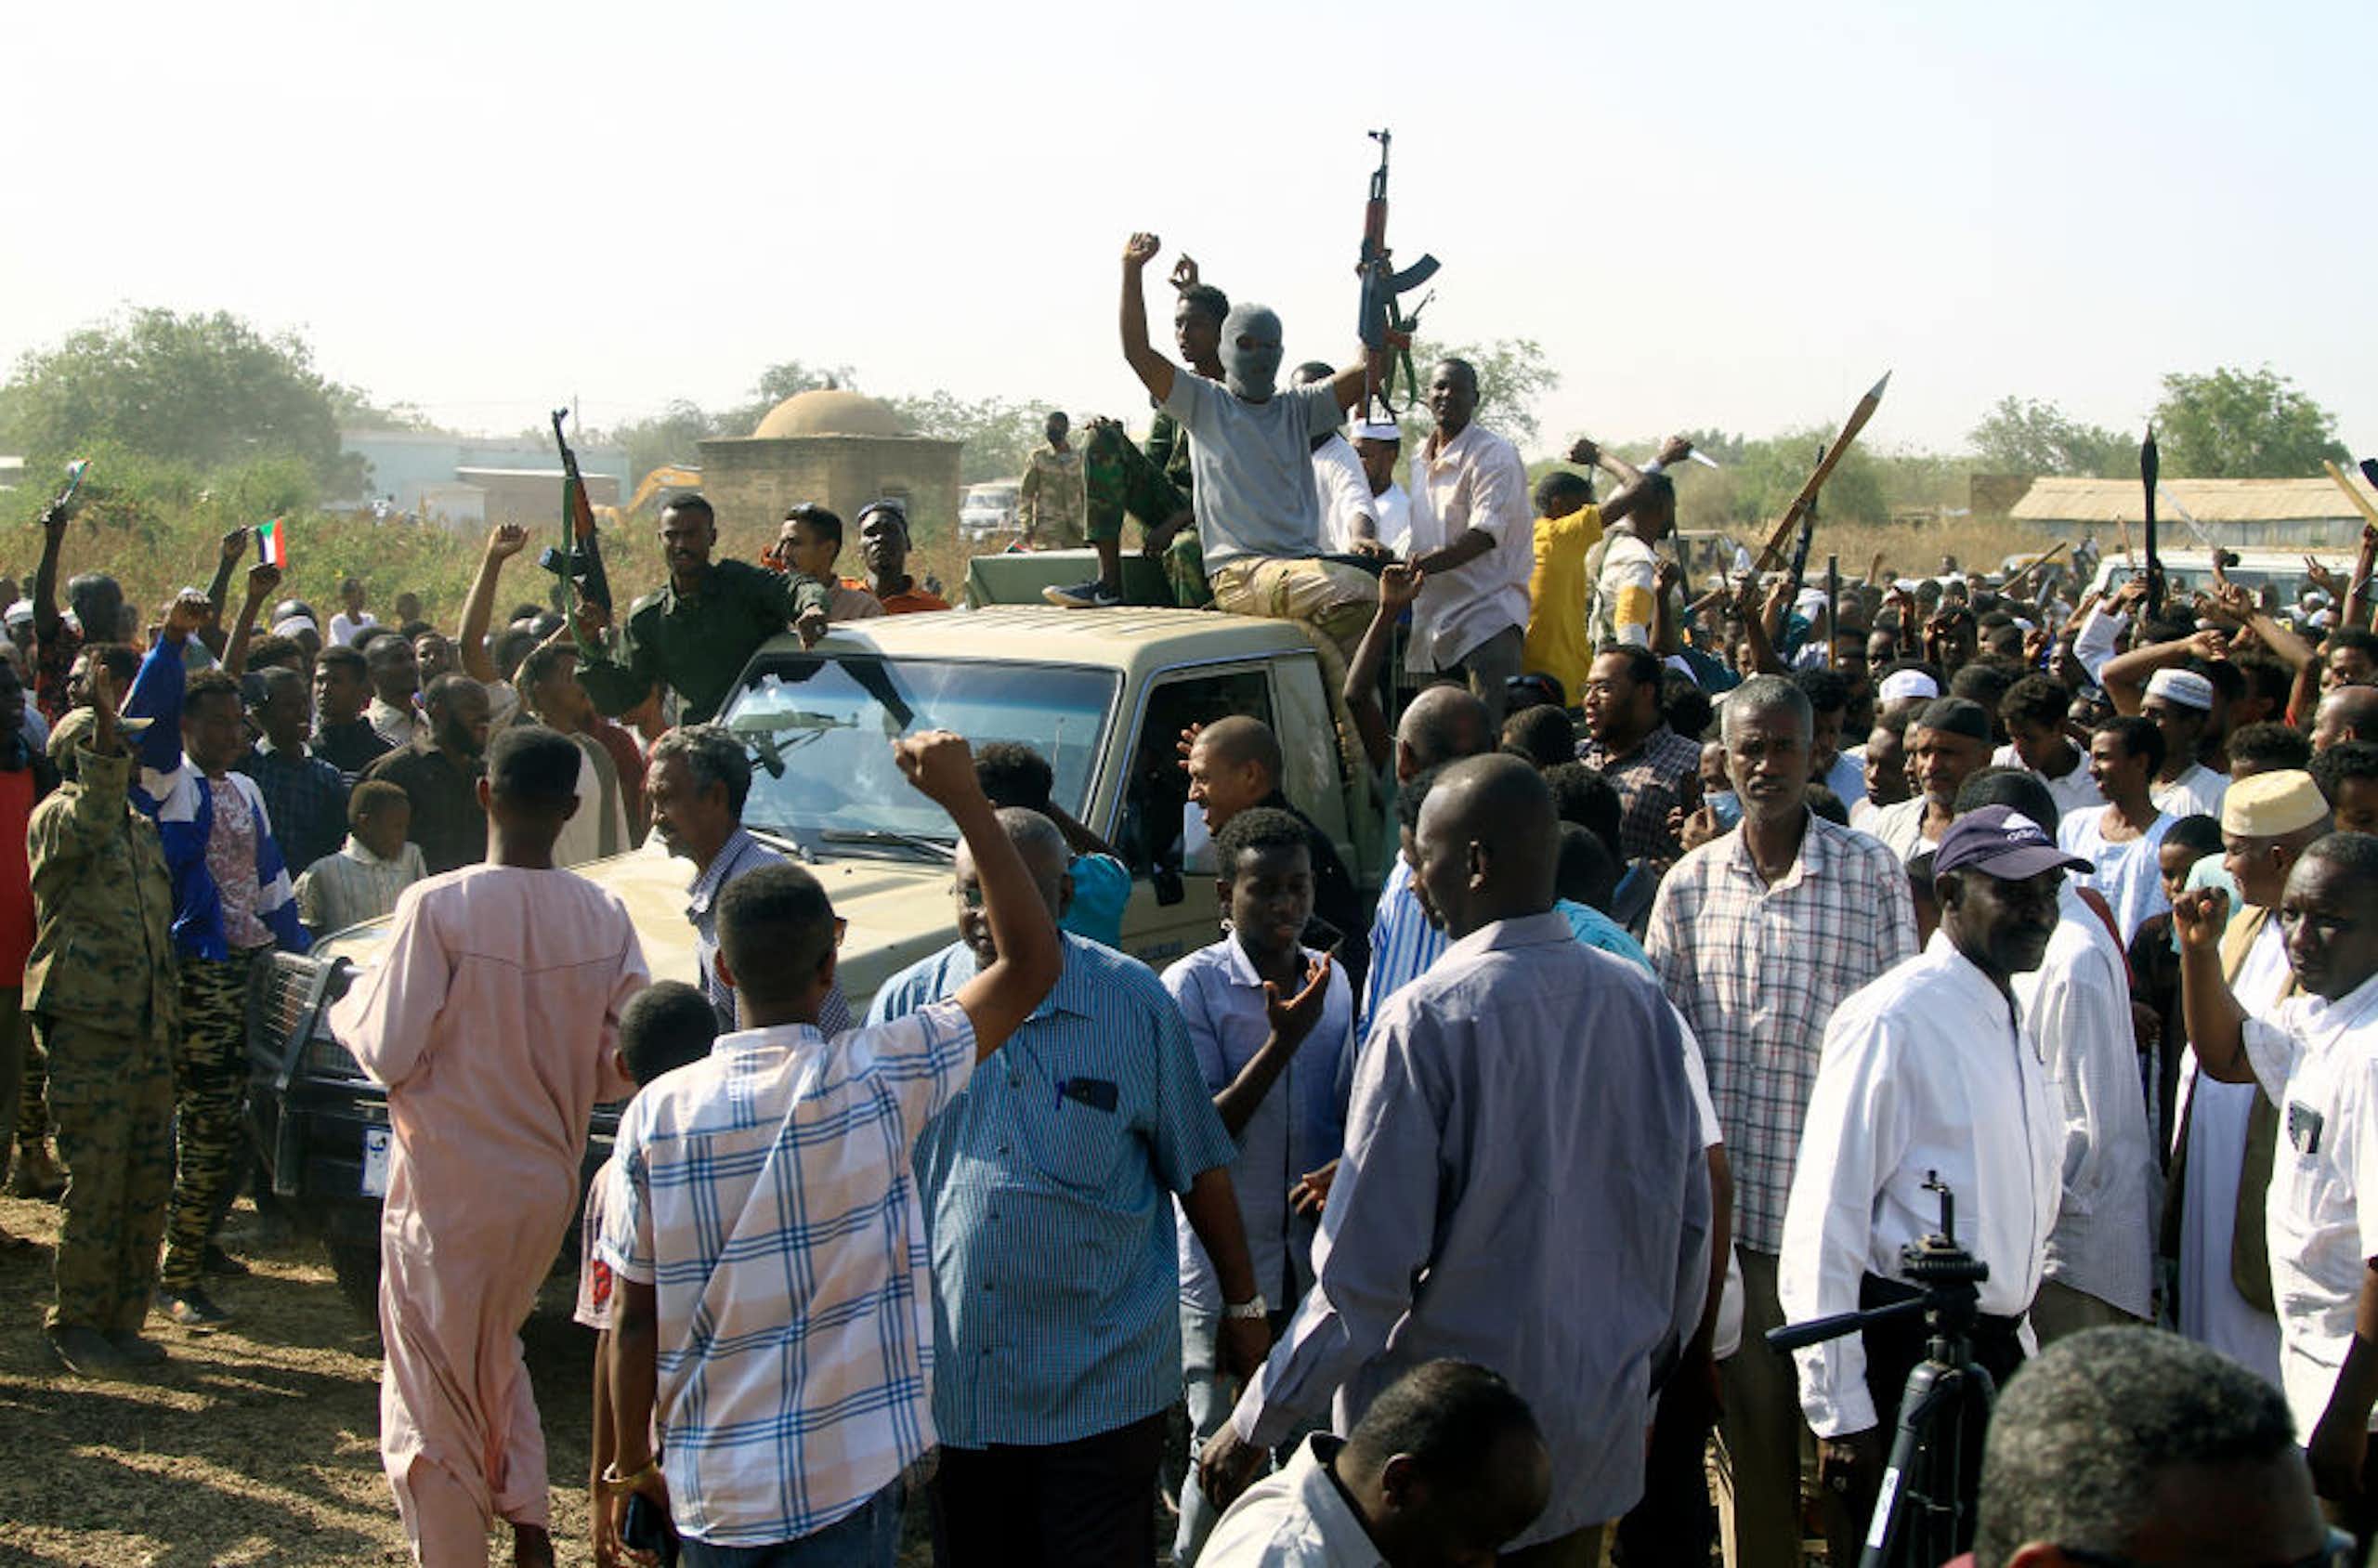 Men surrounding a pick-up track lifting guns and their arms in the air